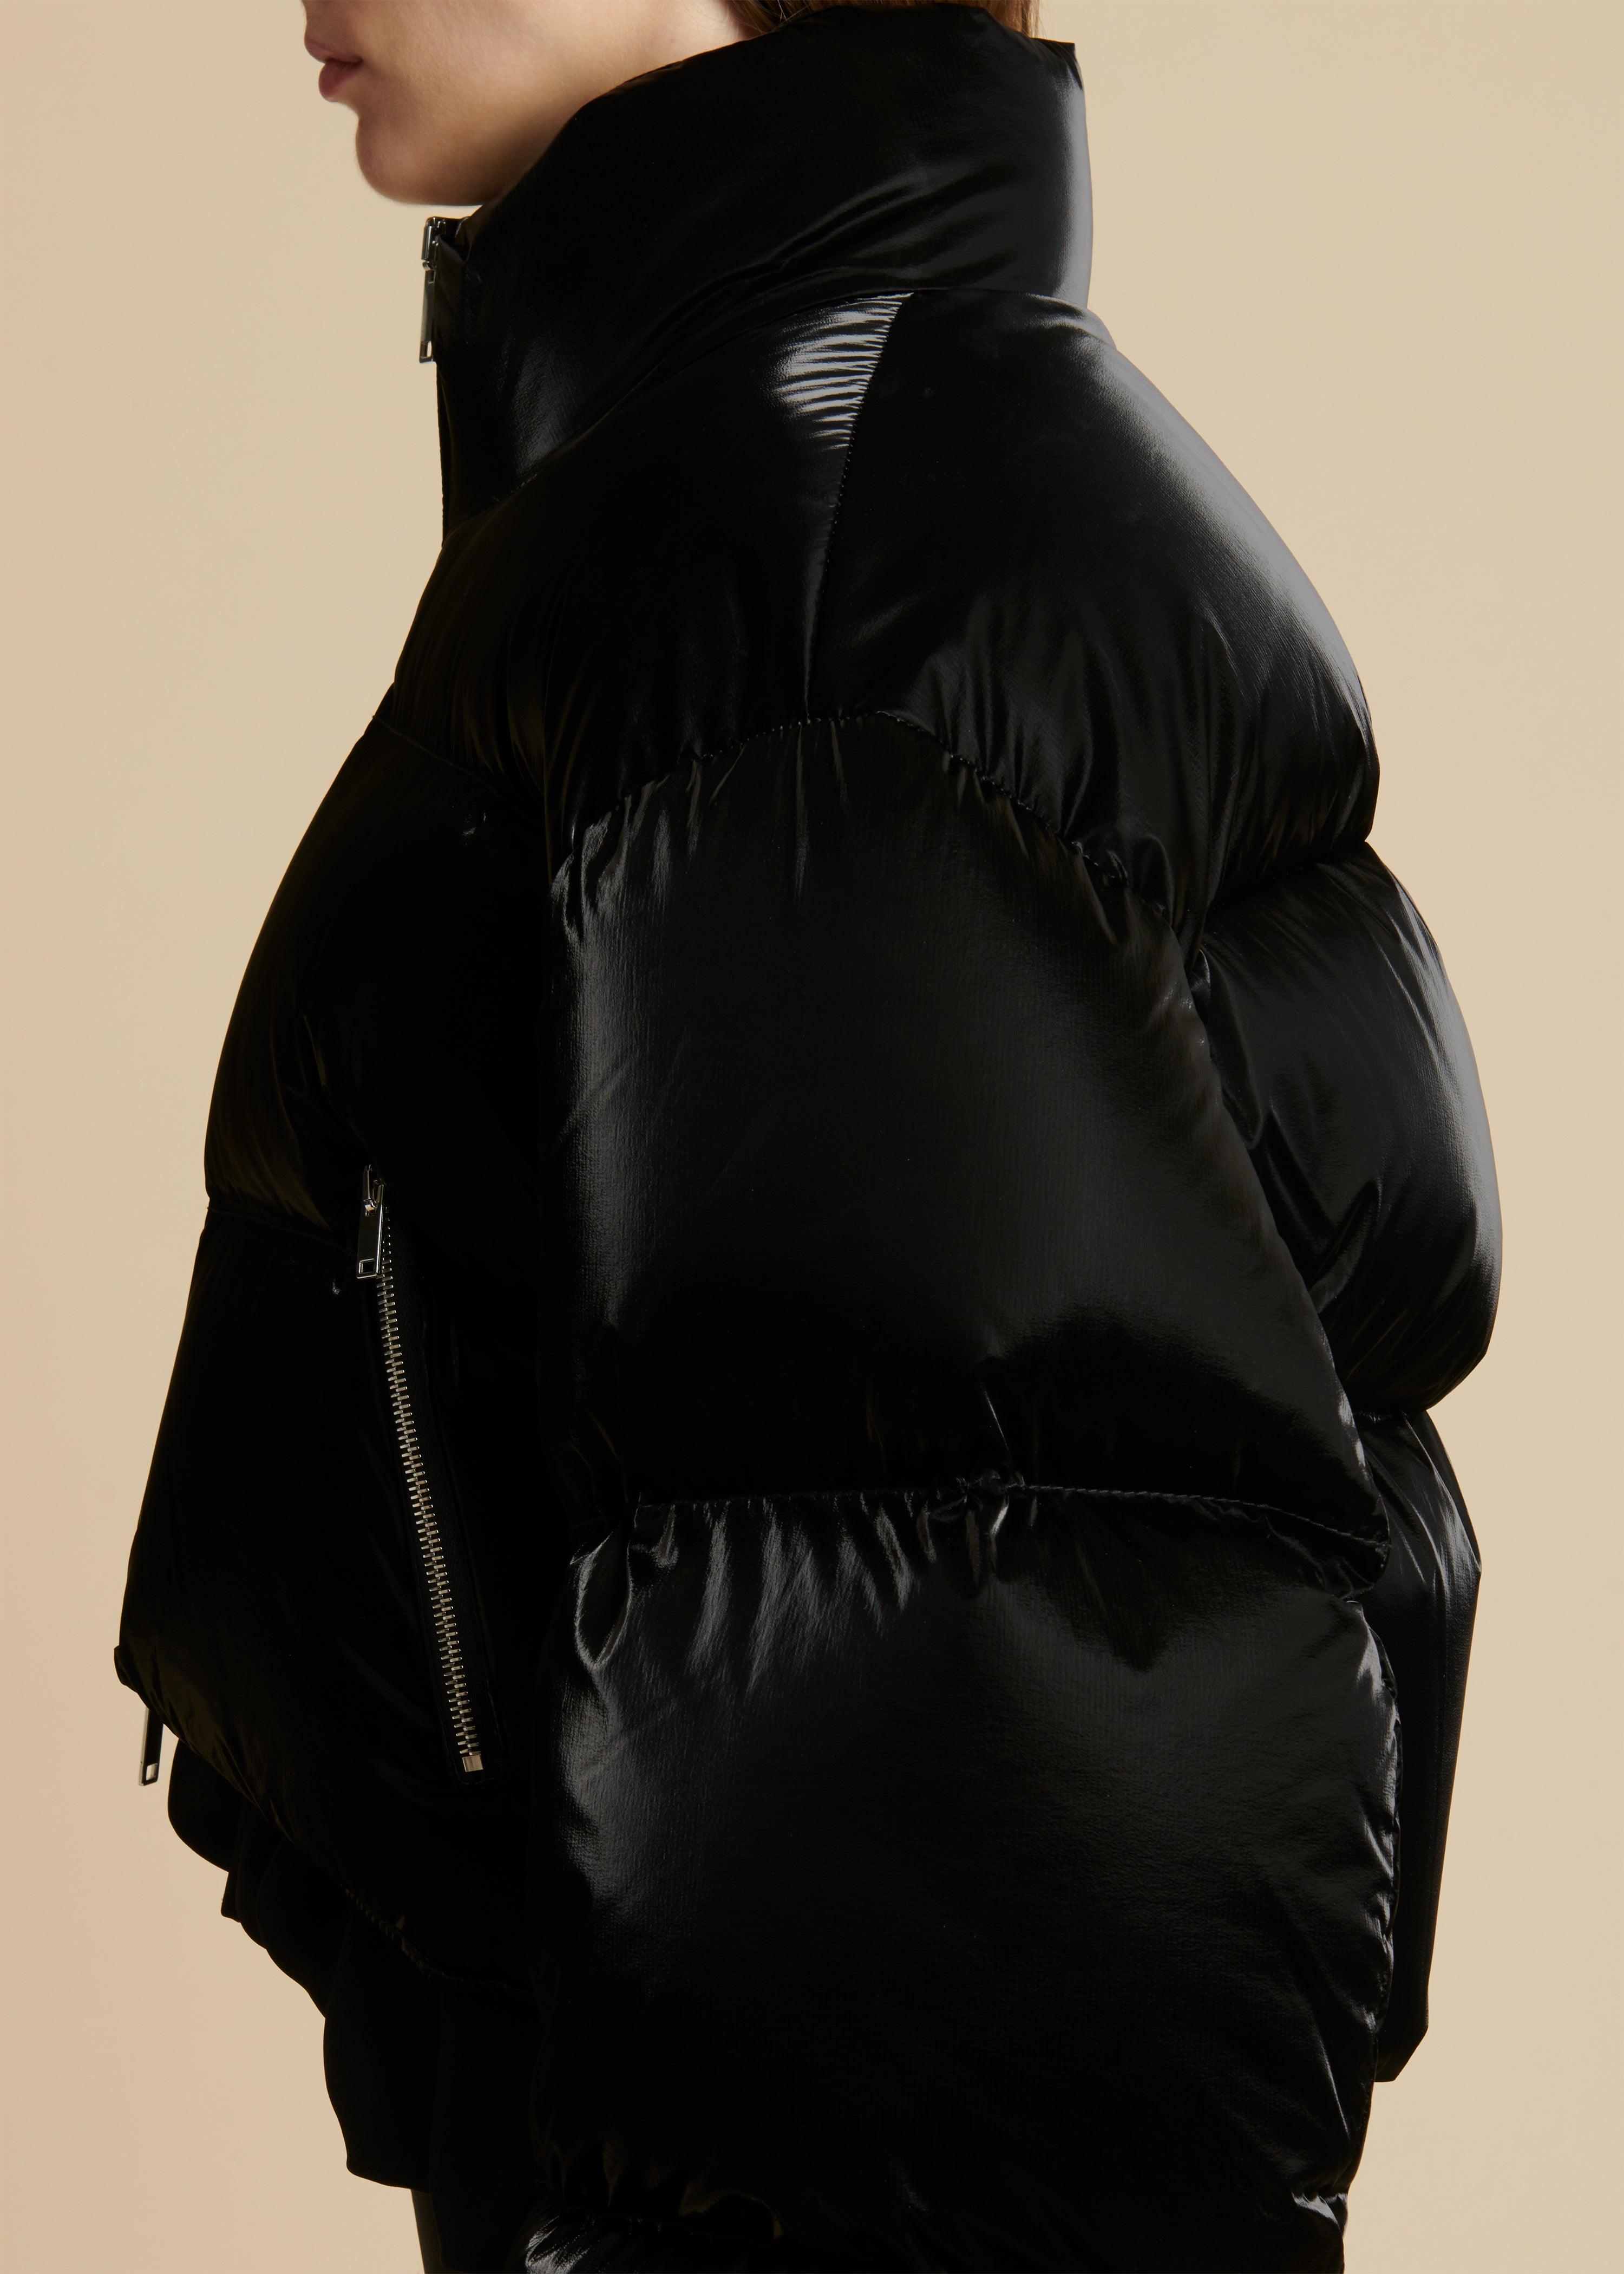 The Fulman Puffer Jacket in Black Liquid Nylon - The Iconic Issue